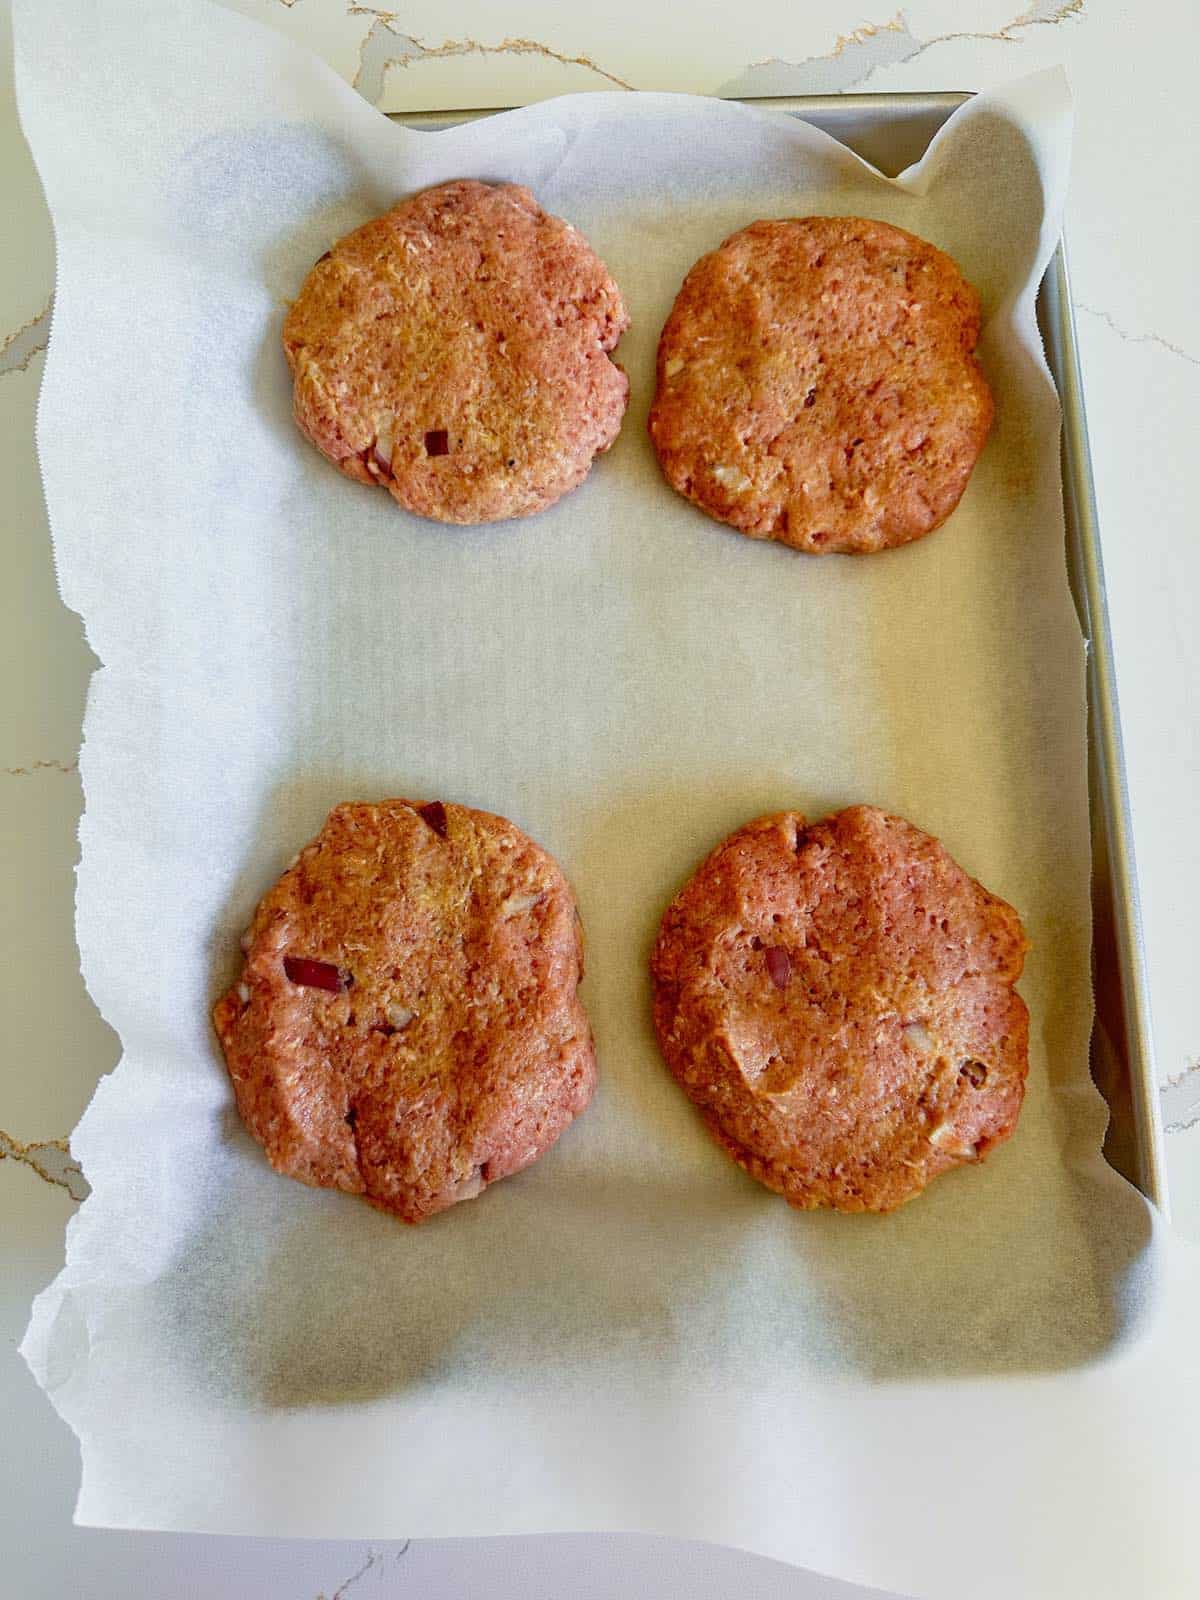 Formed turkey patties on a parchment paper lined baking sheet.